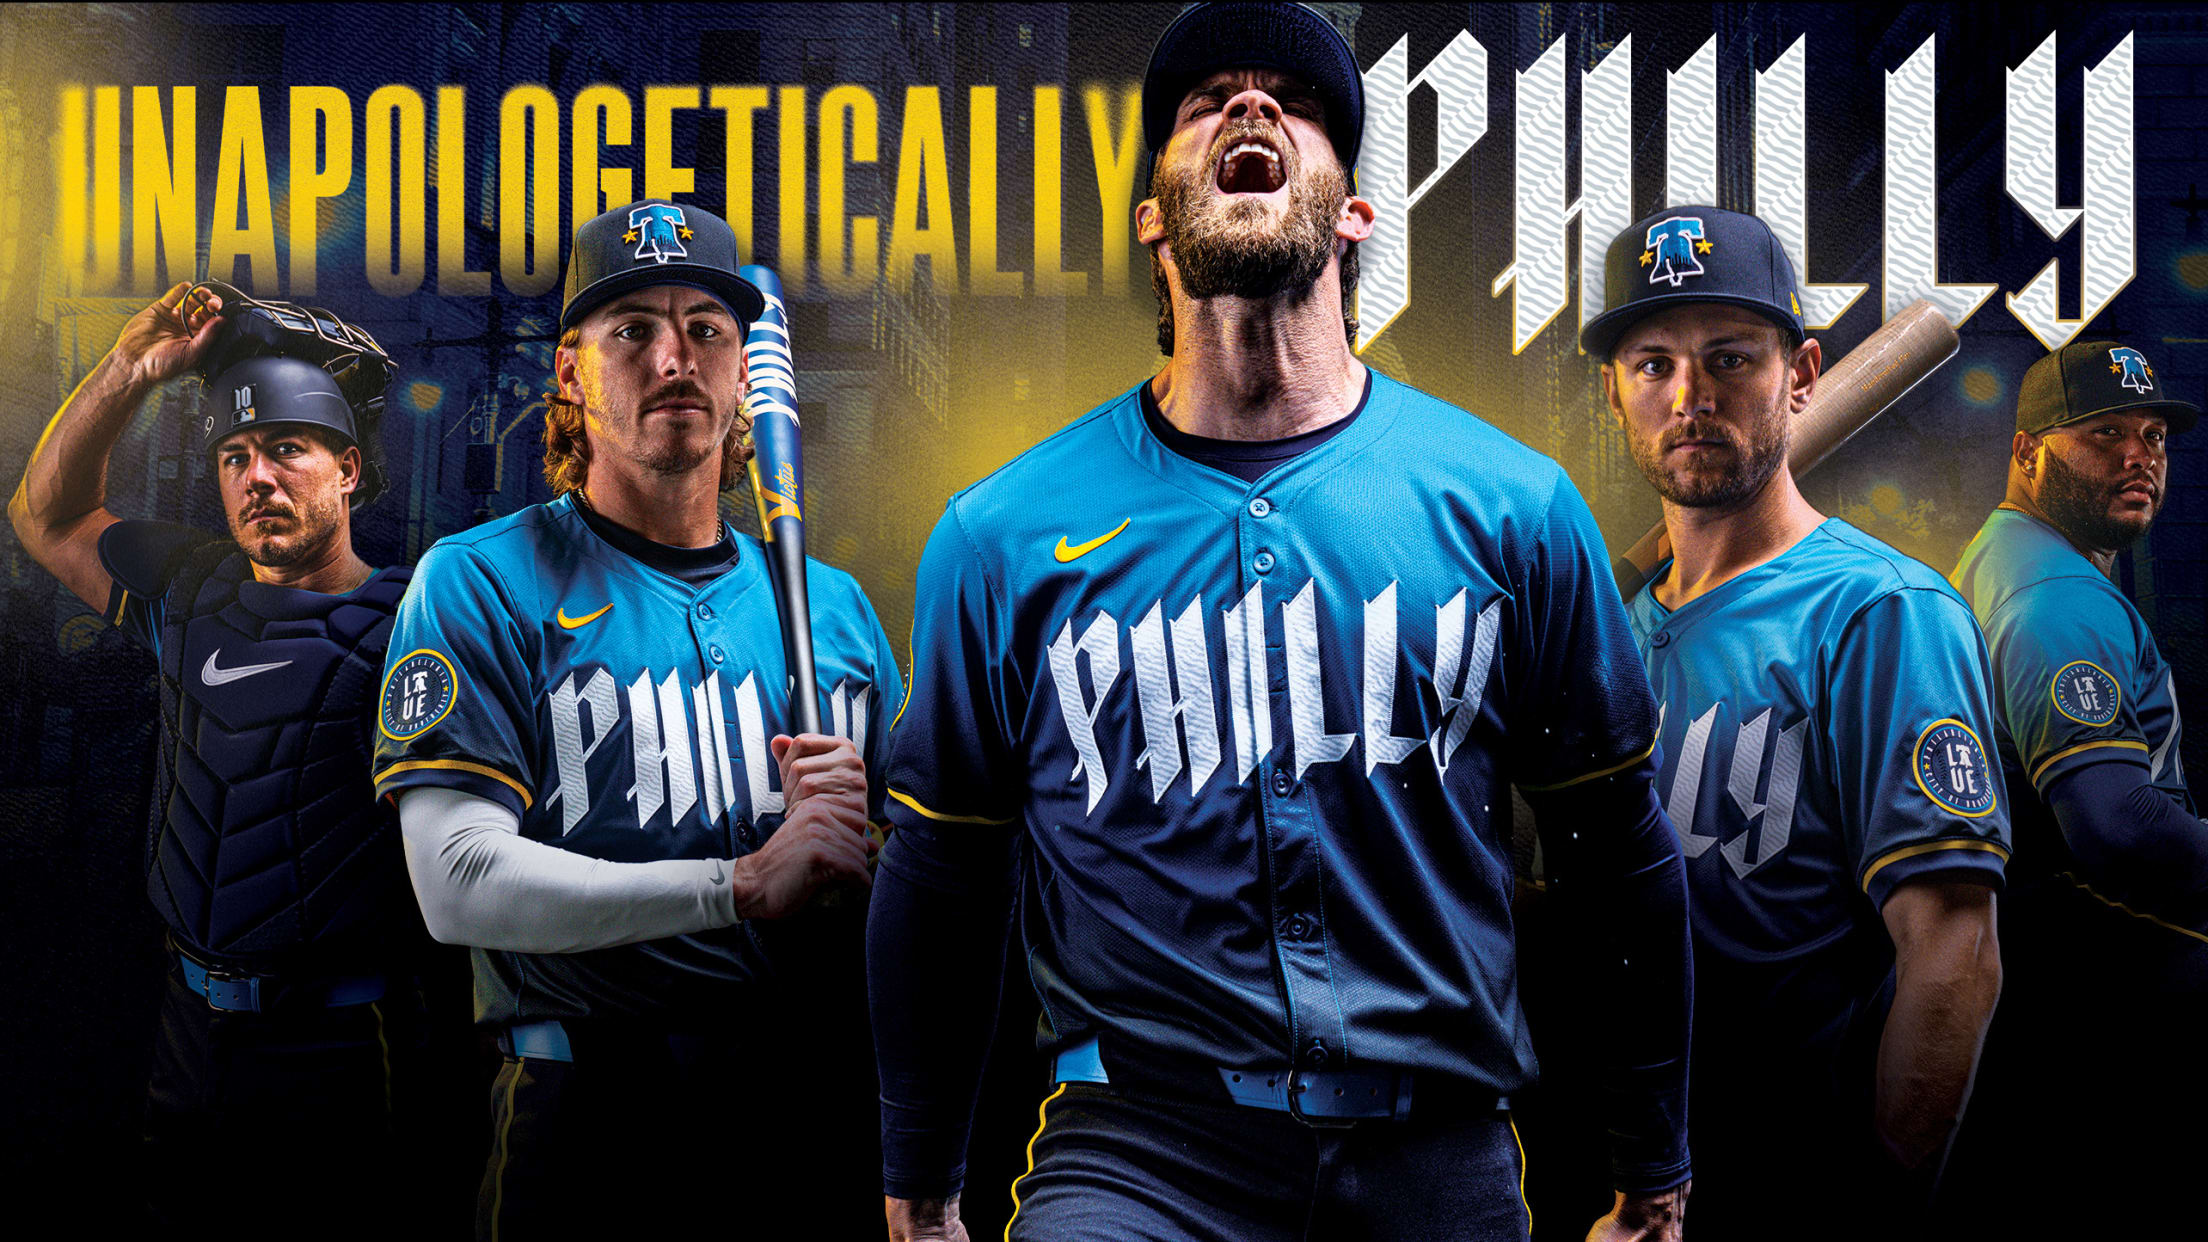 The Phillies' City Connect uniforms are rendered in midnight blue, light blue and yellow